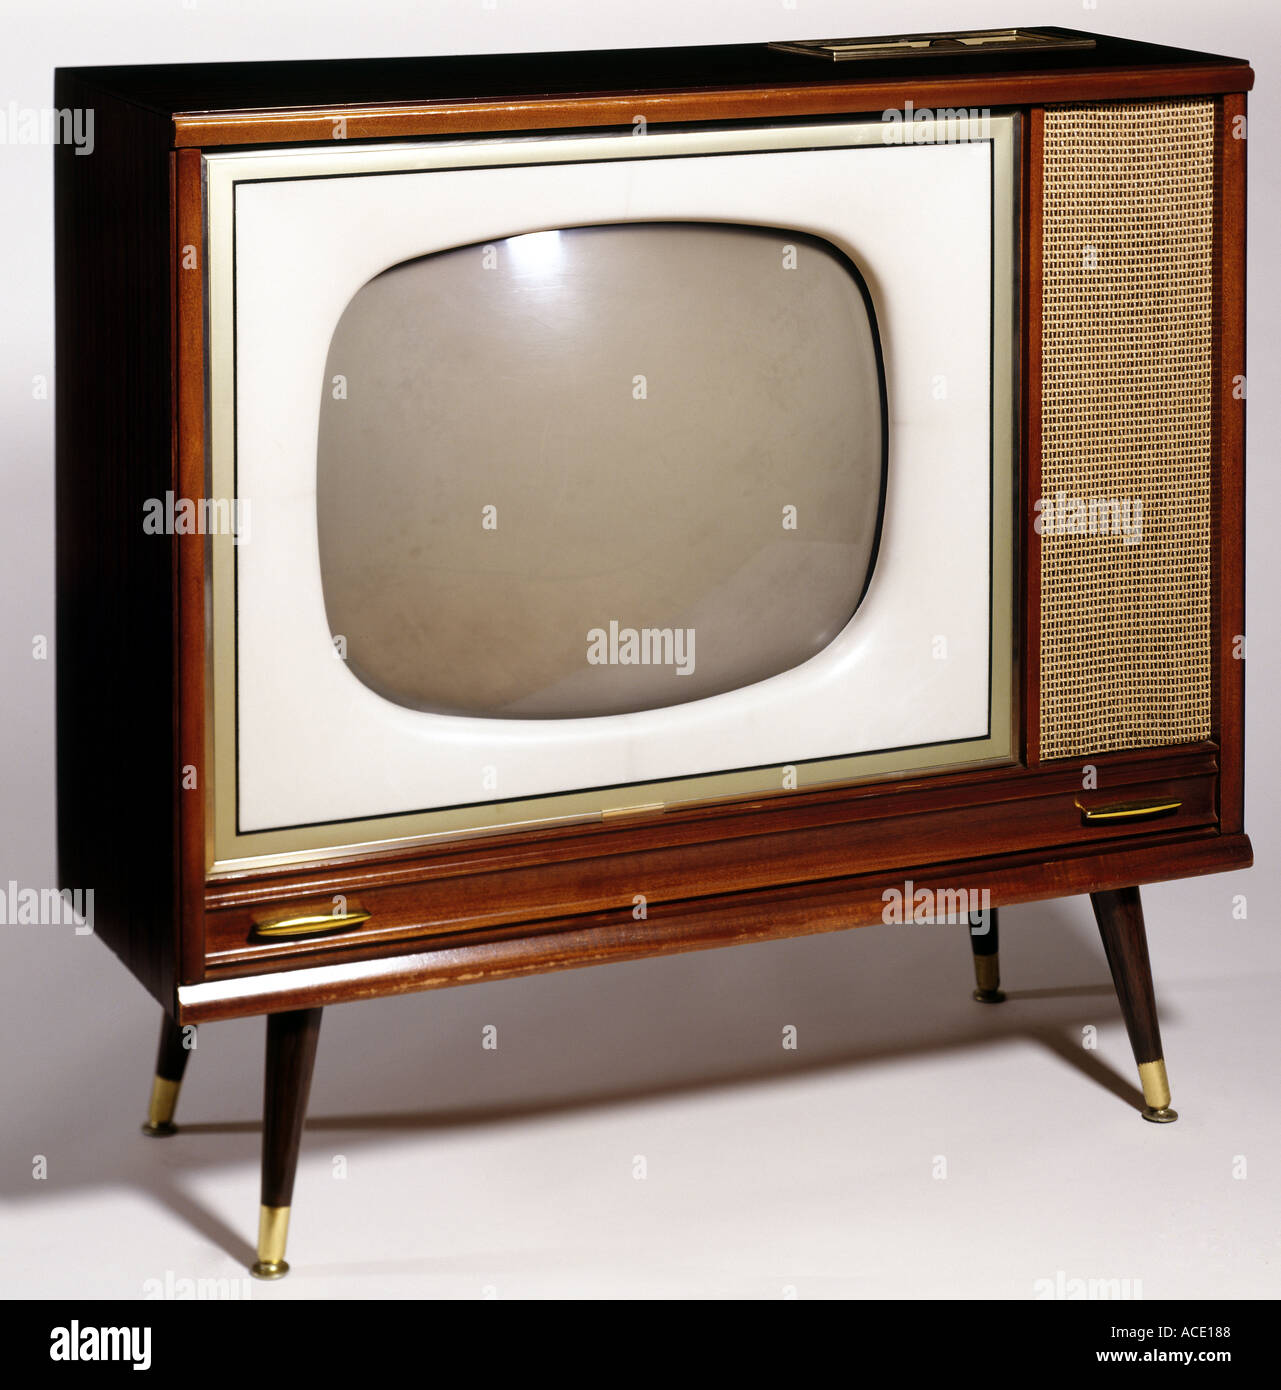 TV Antique Old Fashion Television Wooden Cabinet Stock Photo